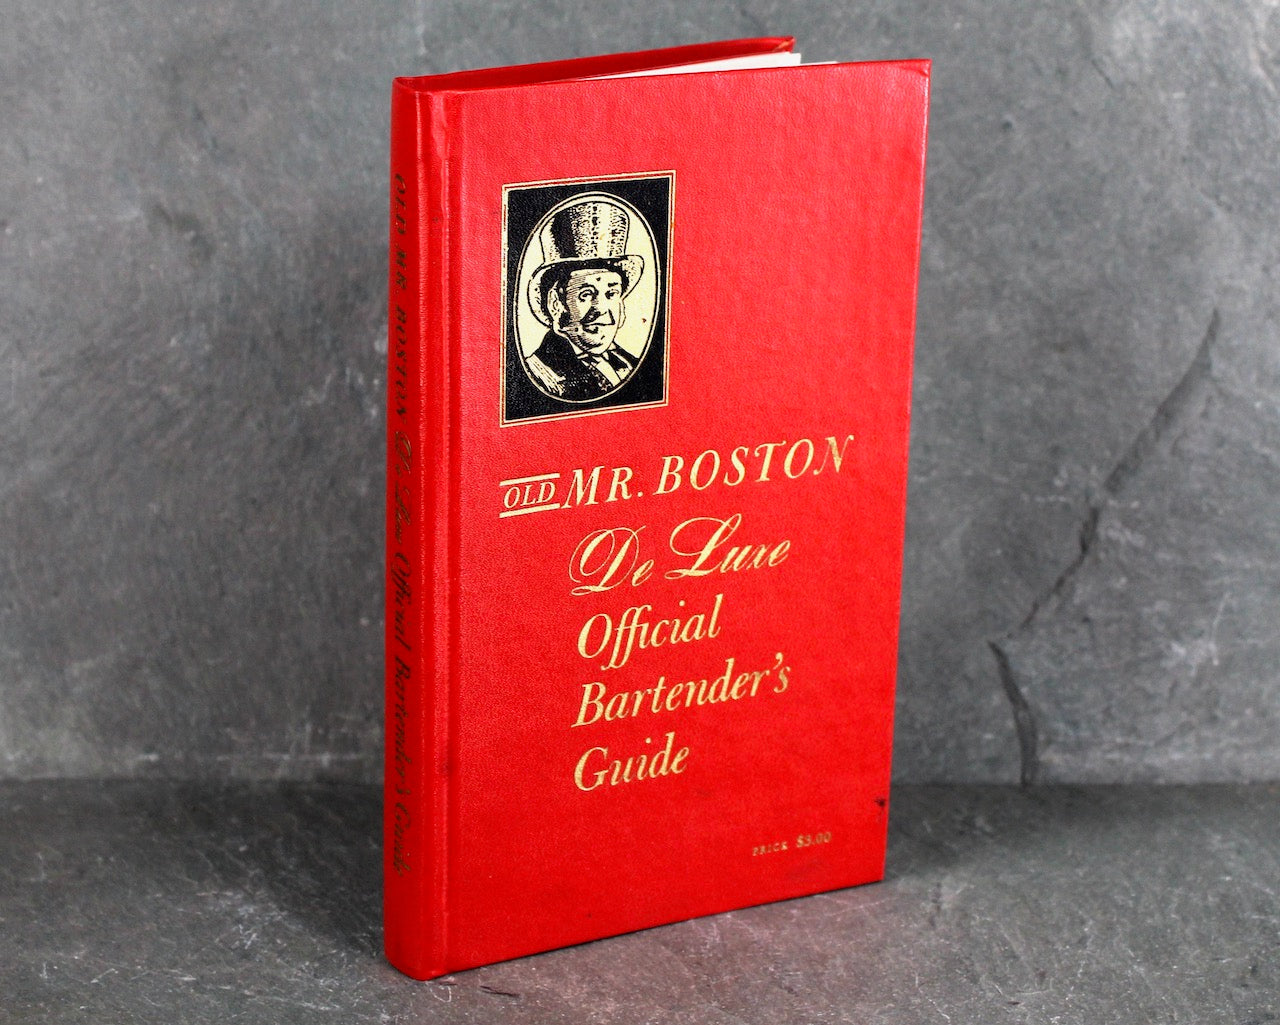 Old Mr. Boston Deluxe Official Bartender's Guide | 1961 17th Edition | Written by Leo Cotton | Published by Mr. Boston Distillers, Inc.